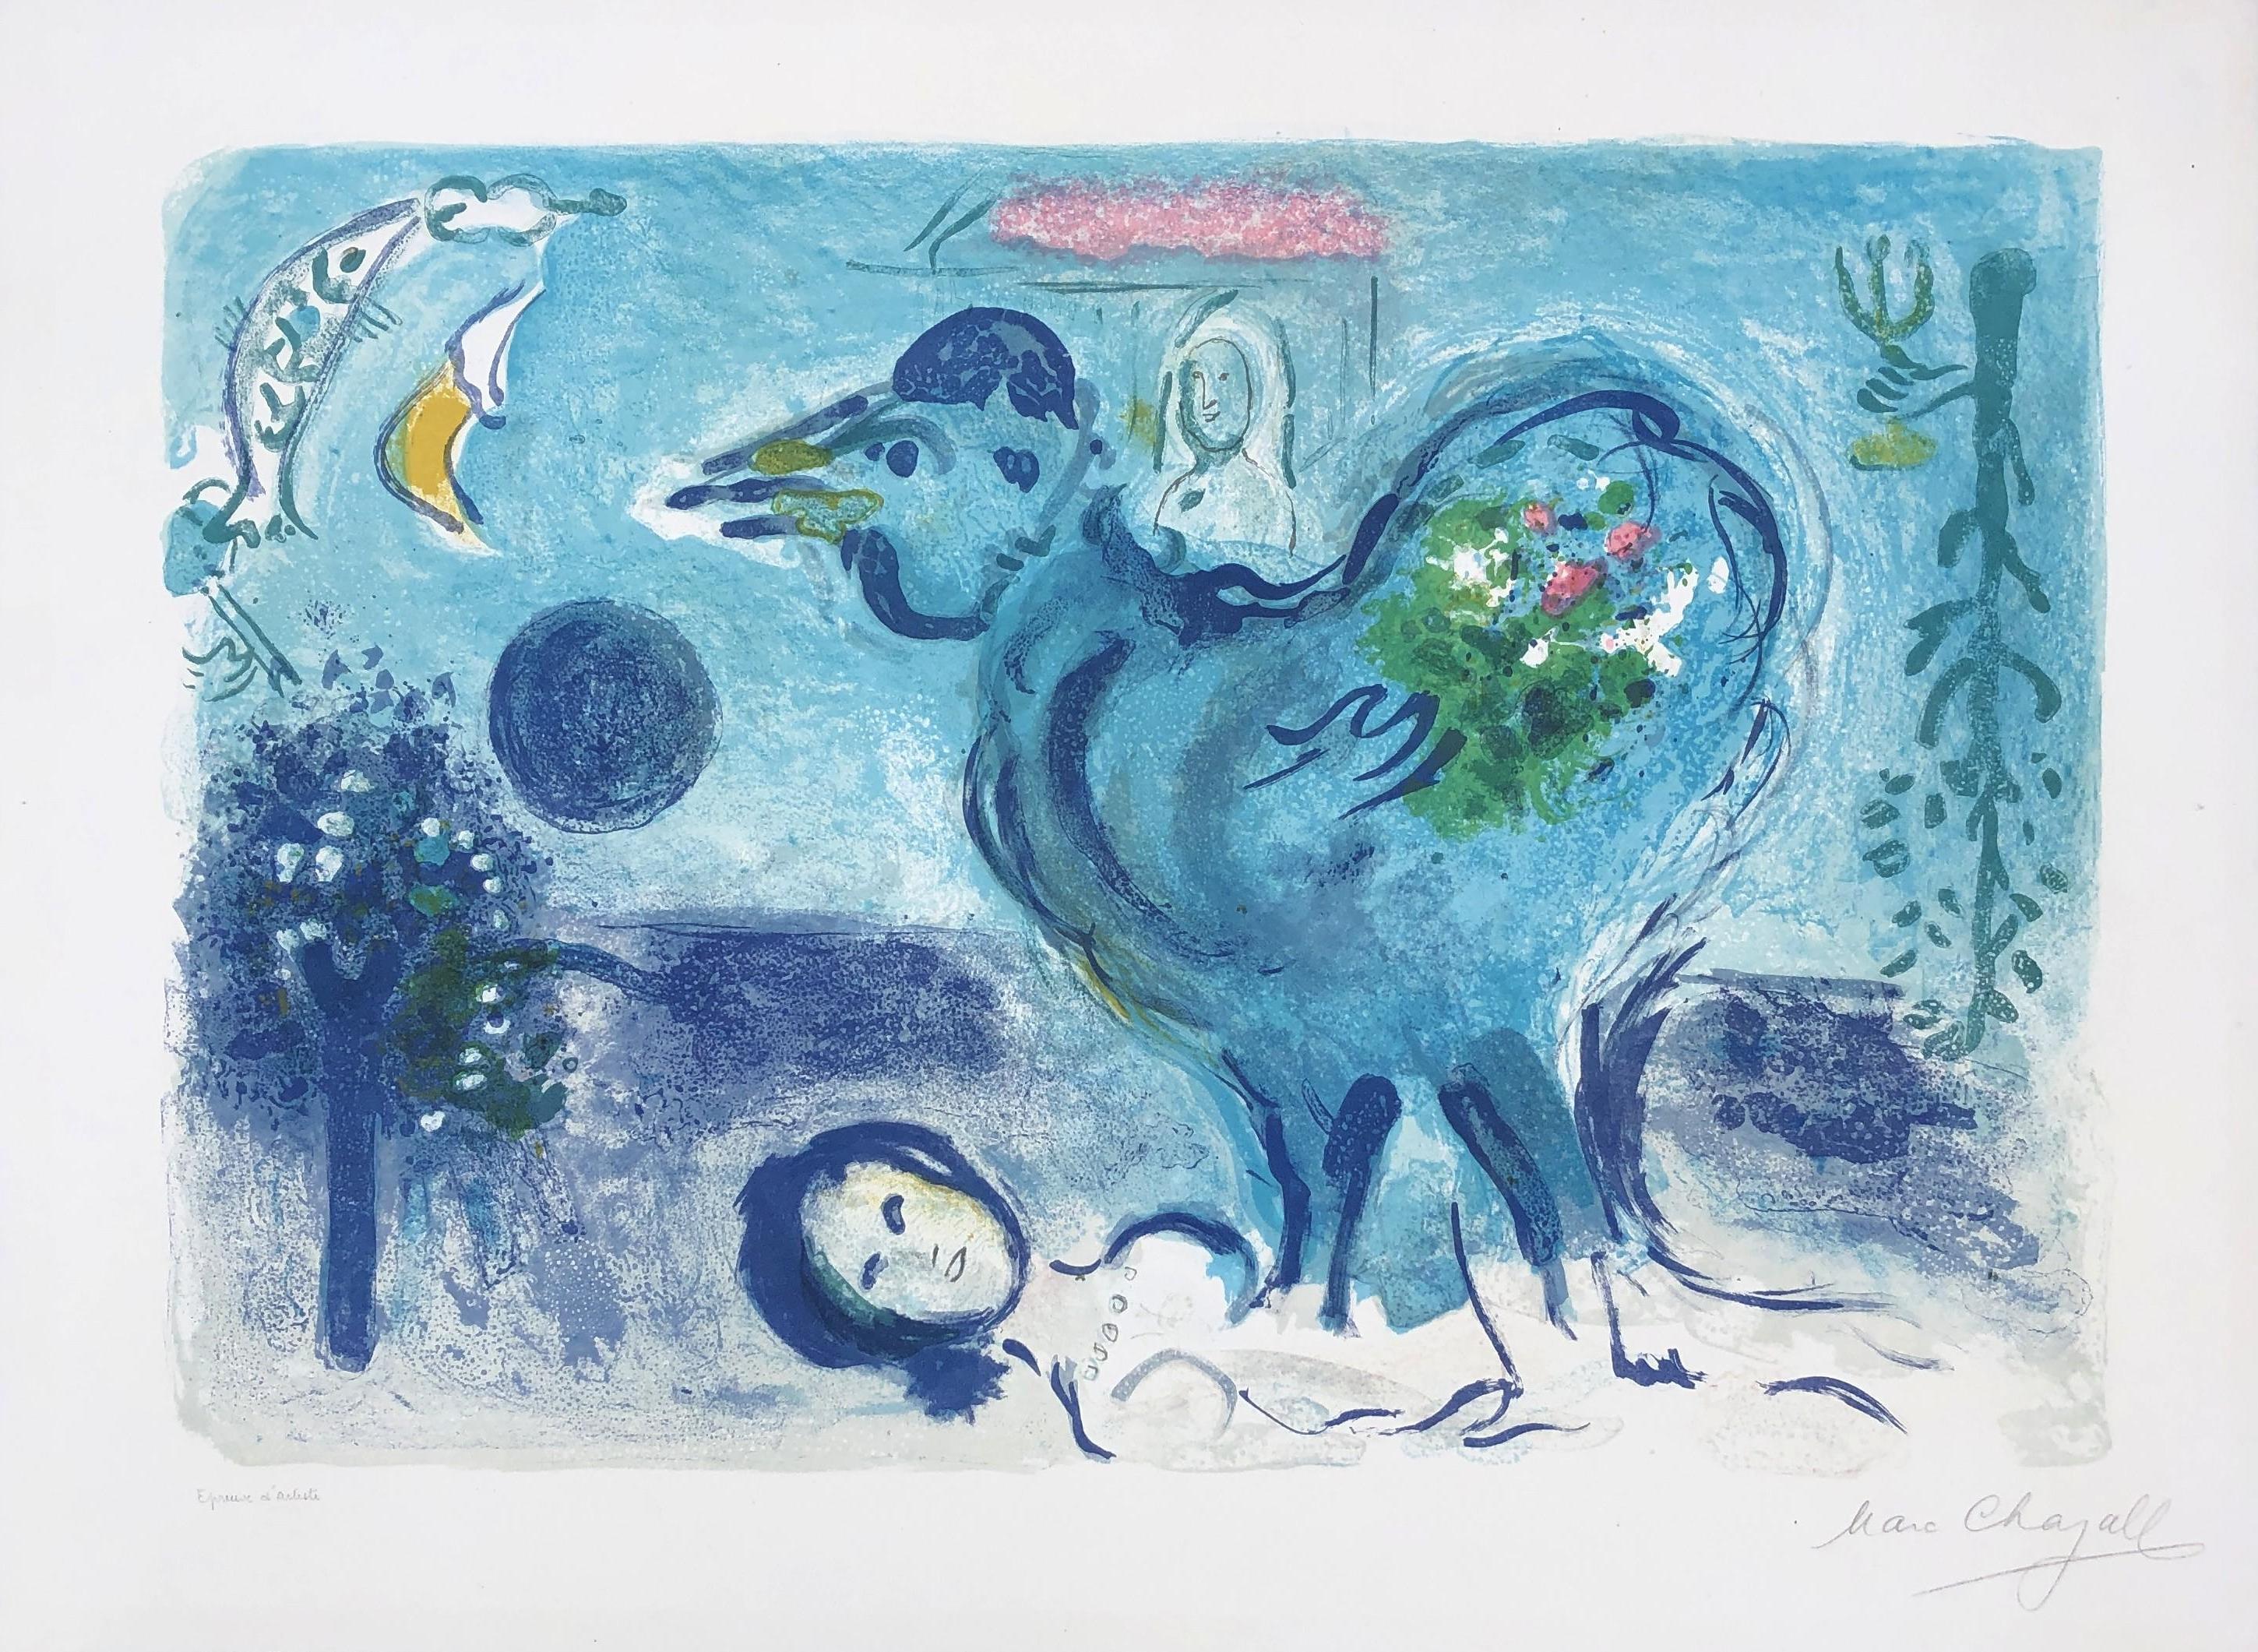 Marc Chagall Figurative Print - Landscape With Rooster - Original Lithograph Handsigned - 100 copies